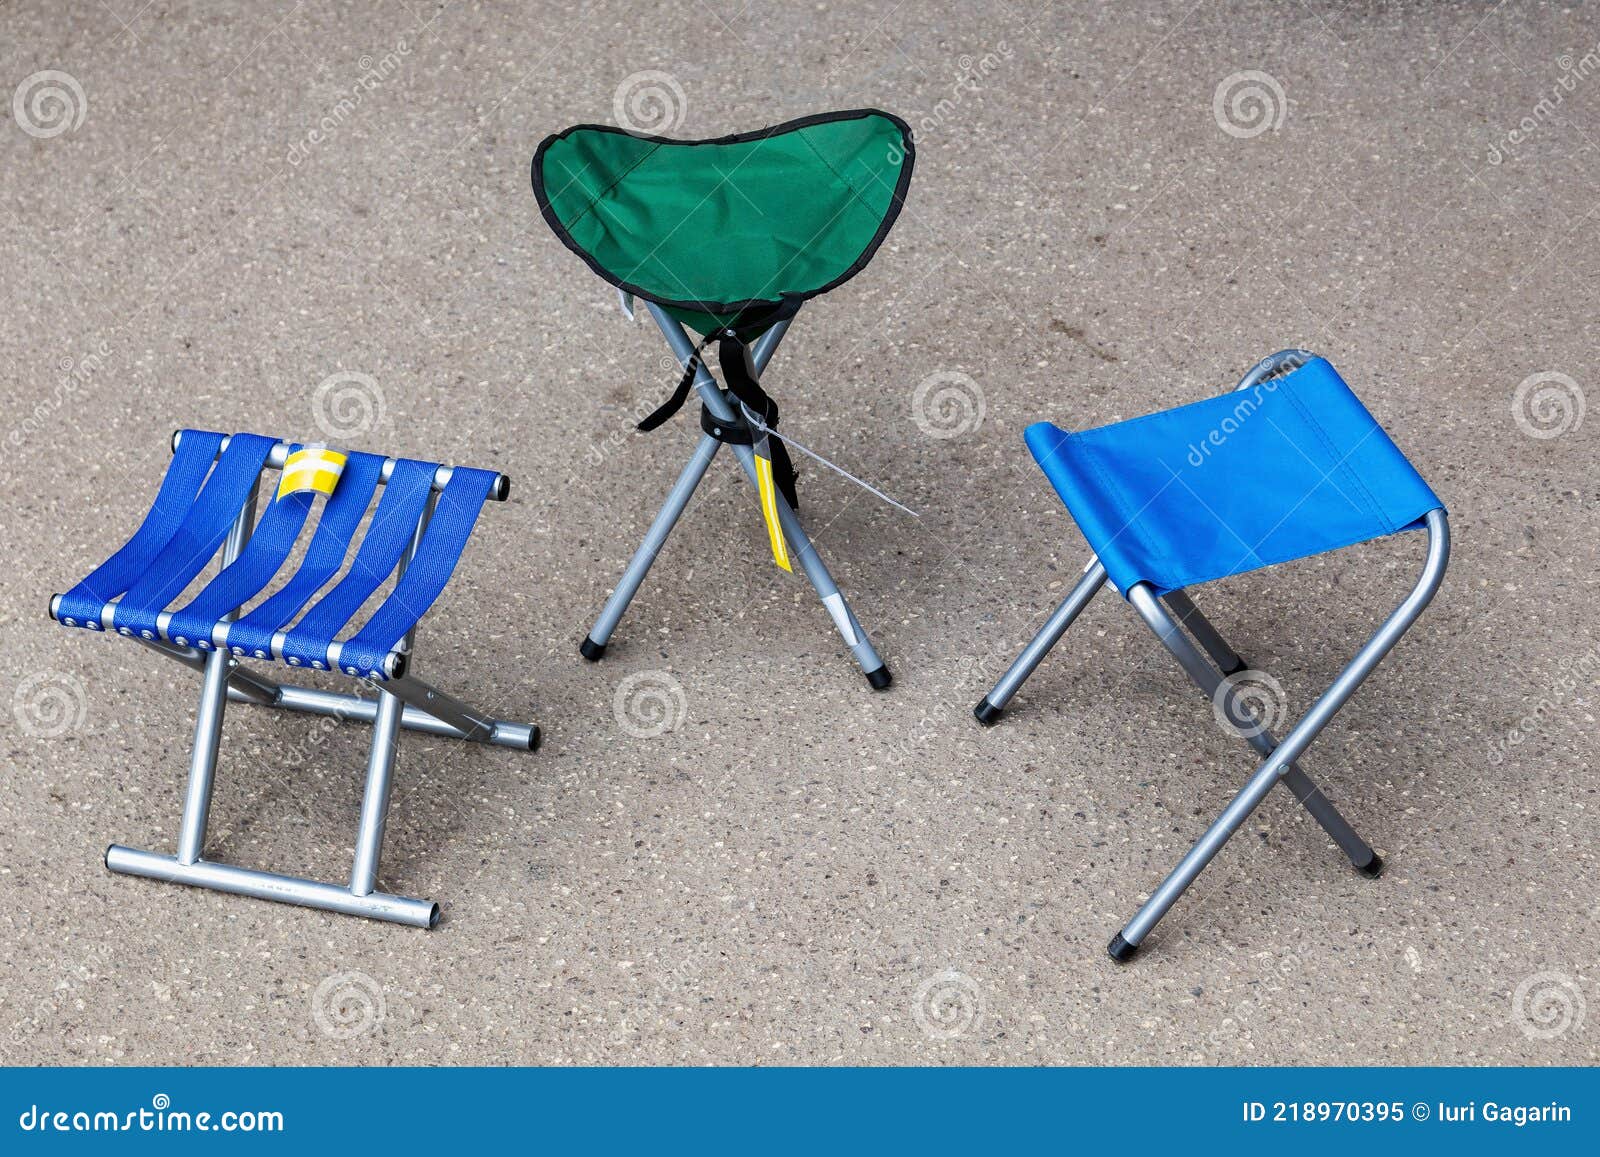 https://thumbs.dreamstime.com/z/folding-small-chairs-outdoor-recreation-fishing-travel-accessories-leisure-218970395.jpg